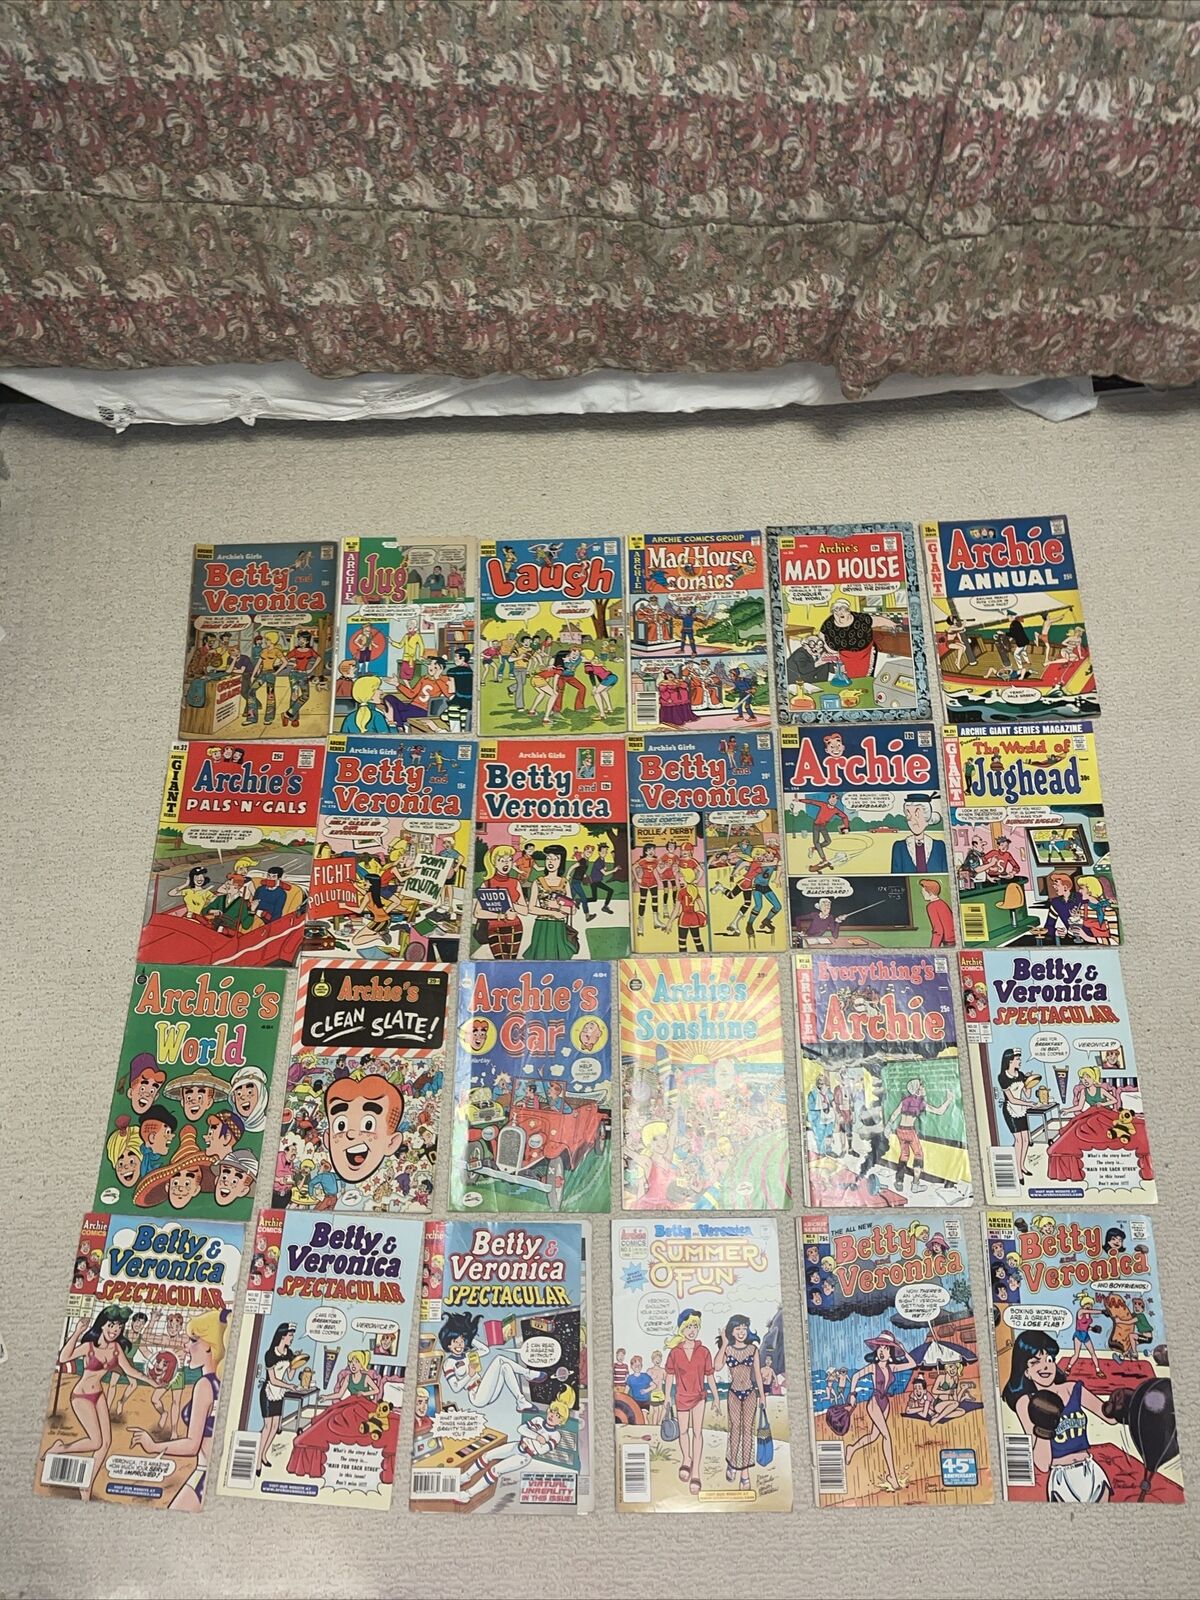 Archie’s Series Vintage Mixed Editions Magazines Lot of 24 MRA#12